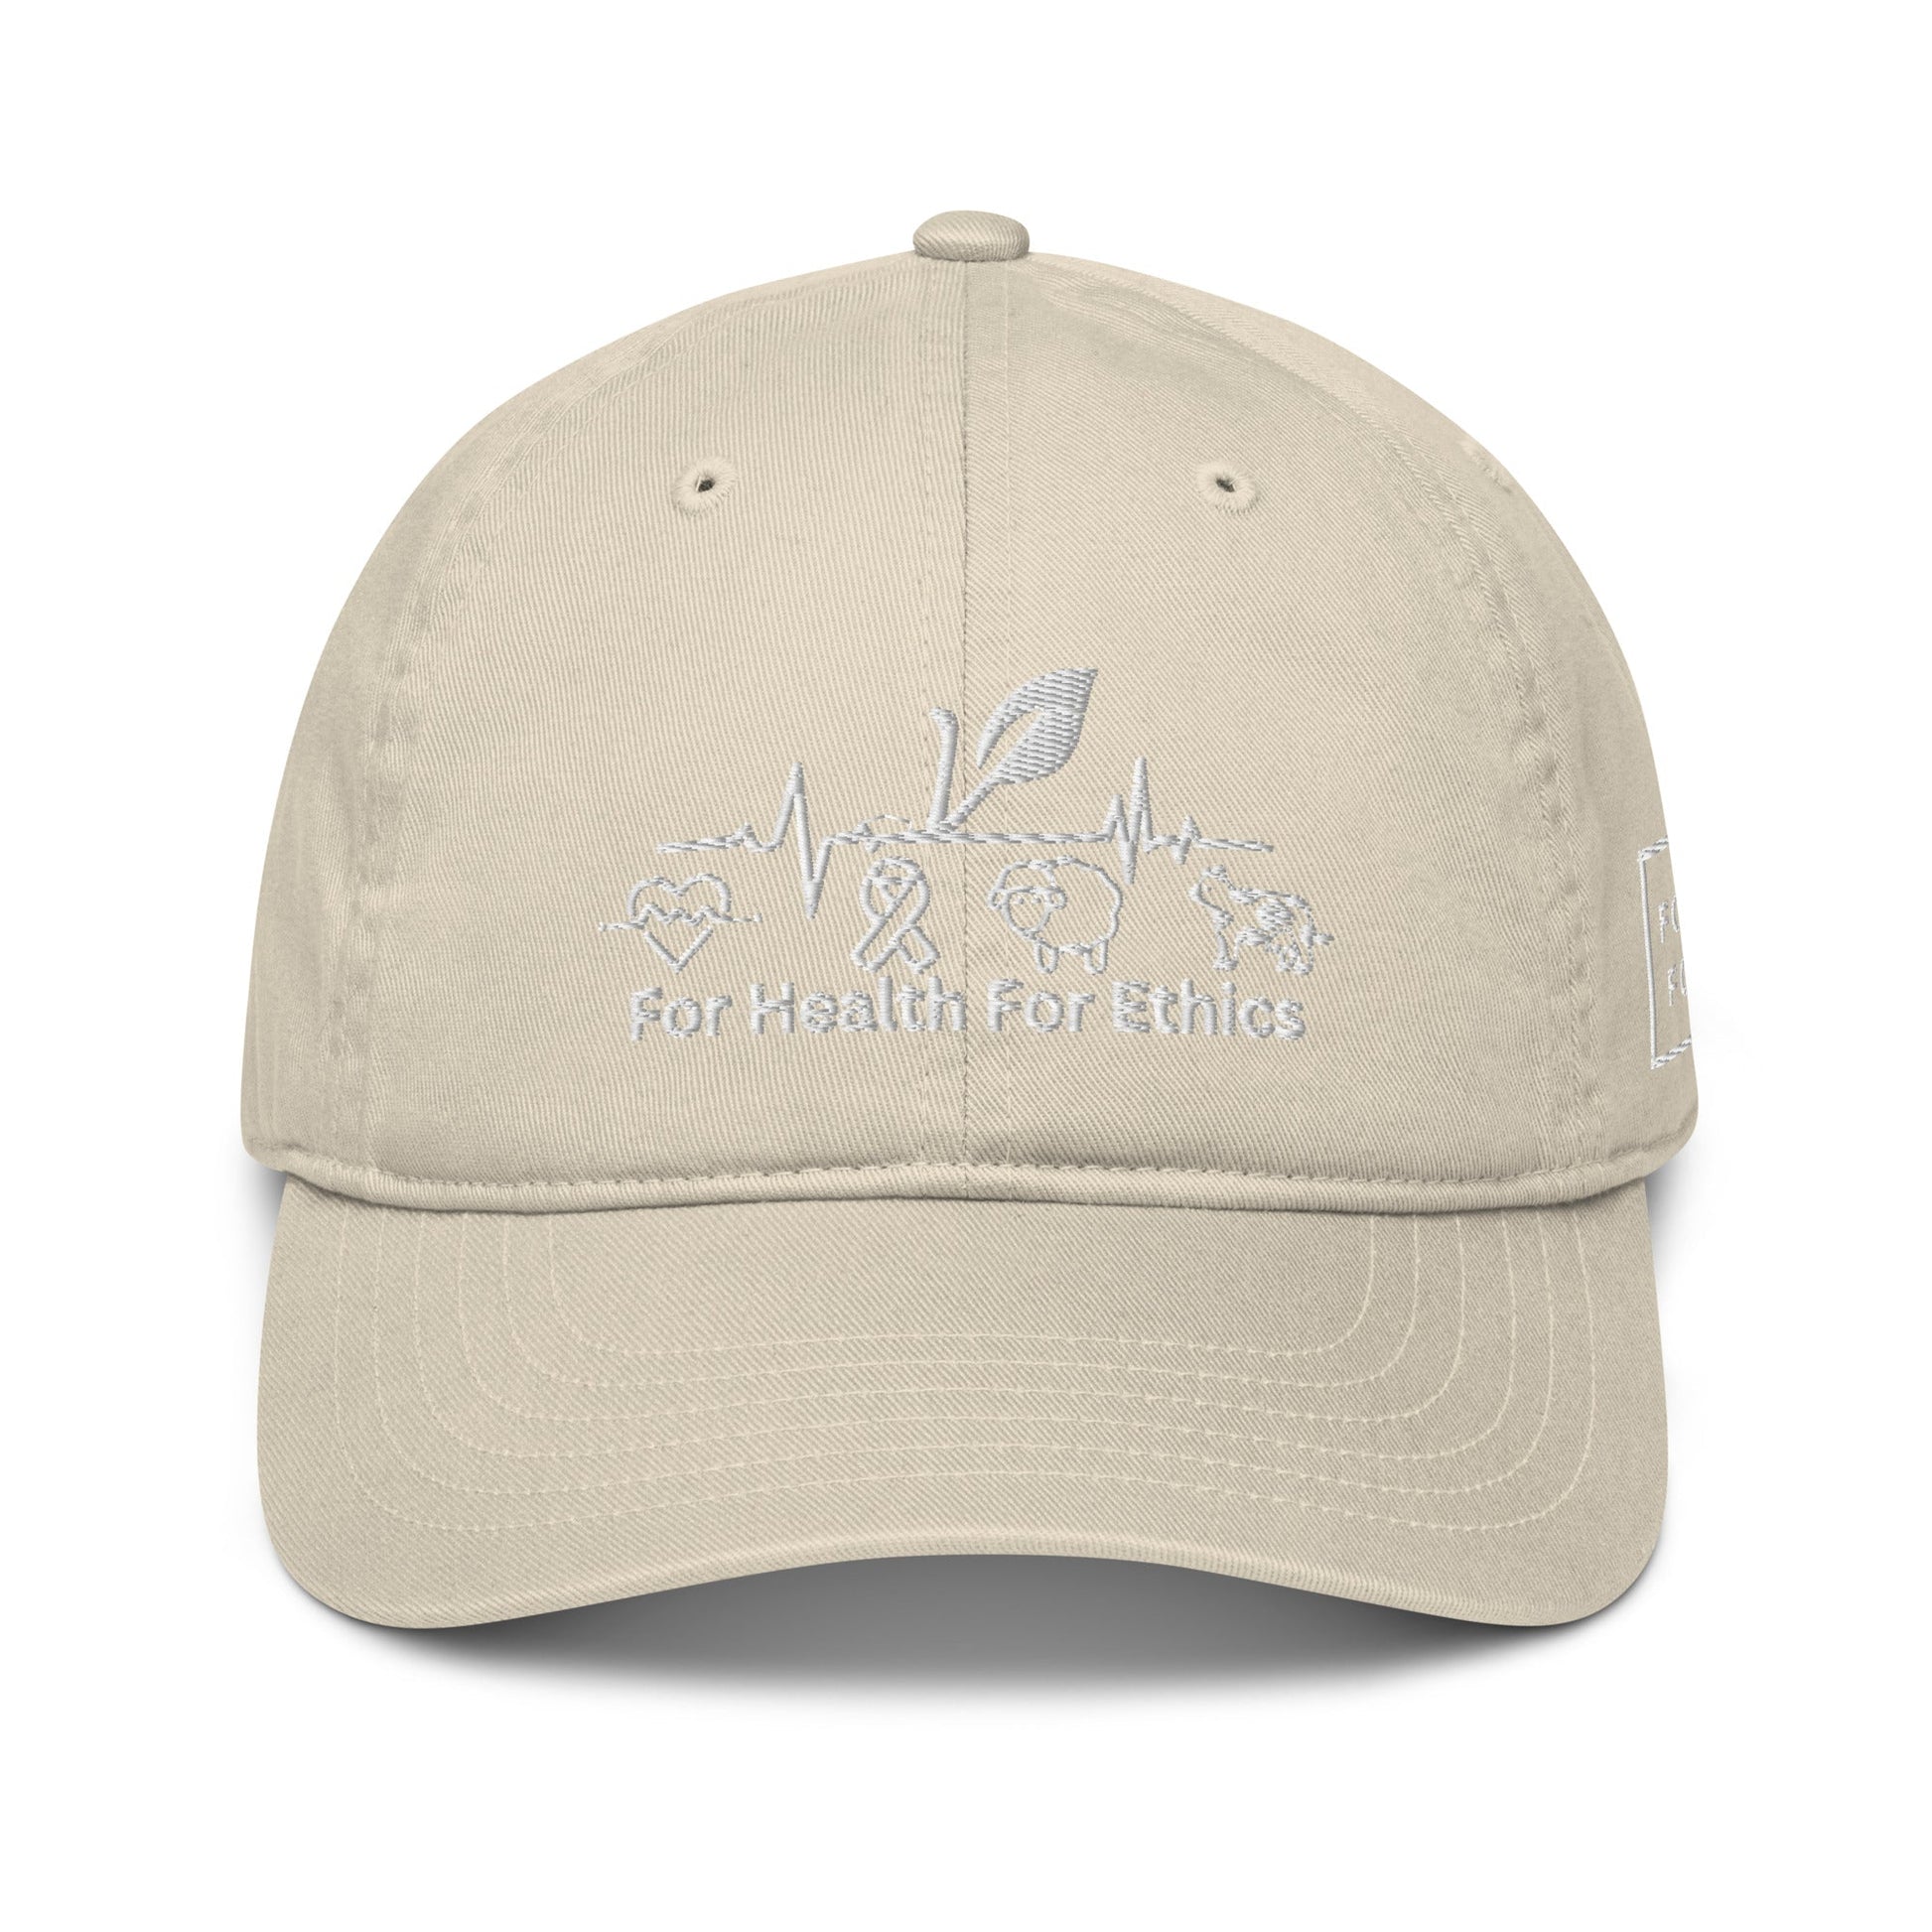 Vegan Organic dad hat - For Health For Ethics - Oyster - Front